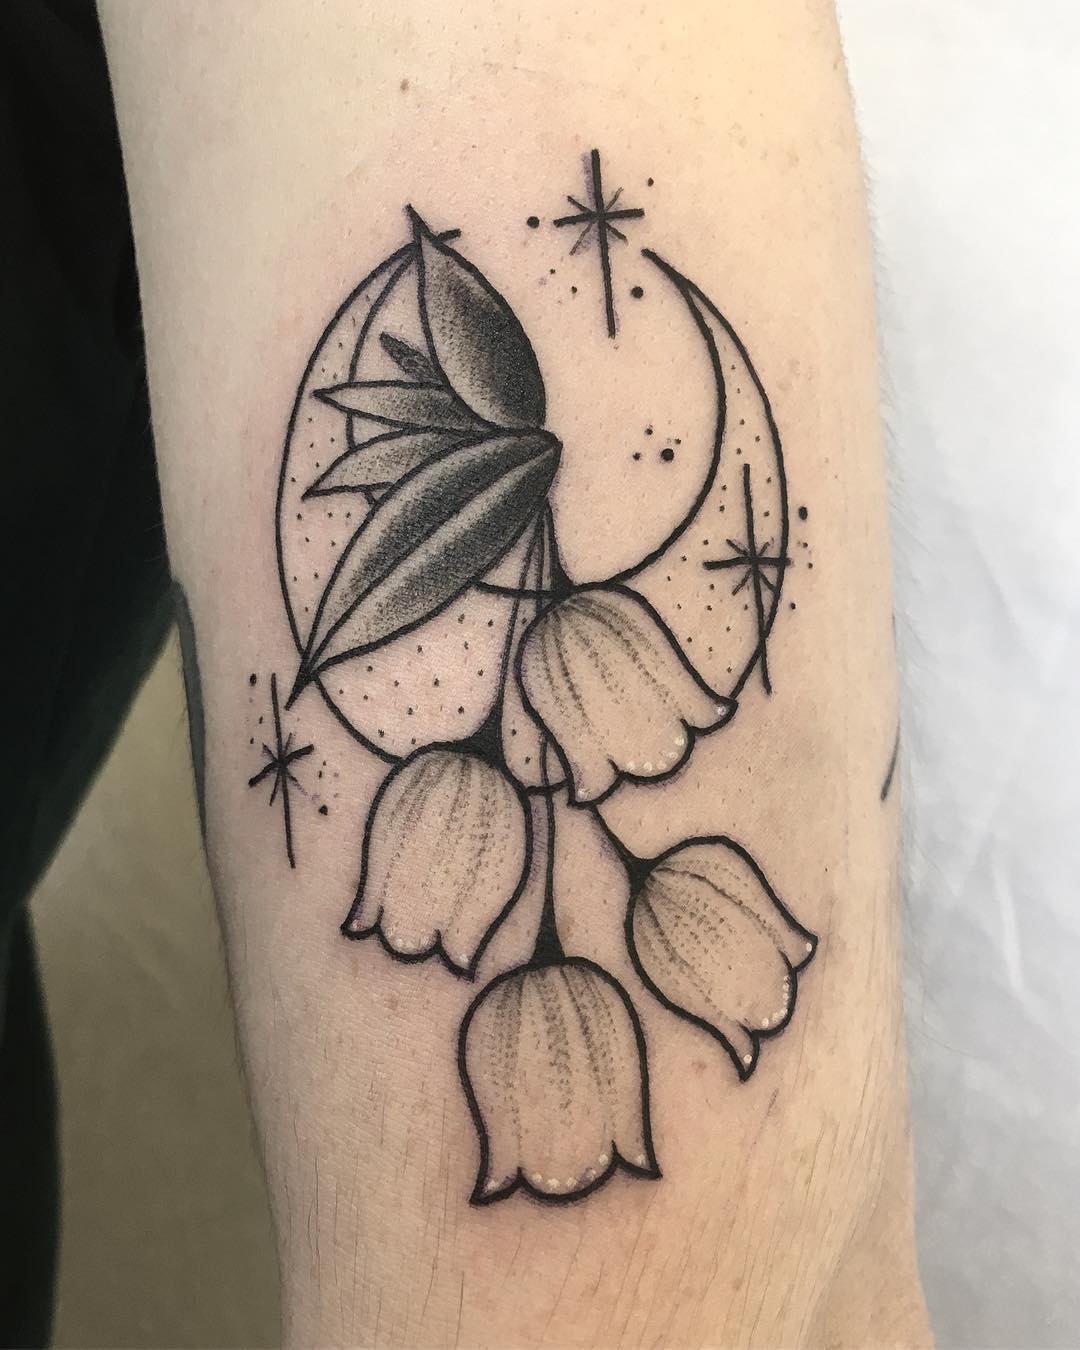 Lilies of the valley tattoo